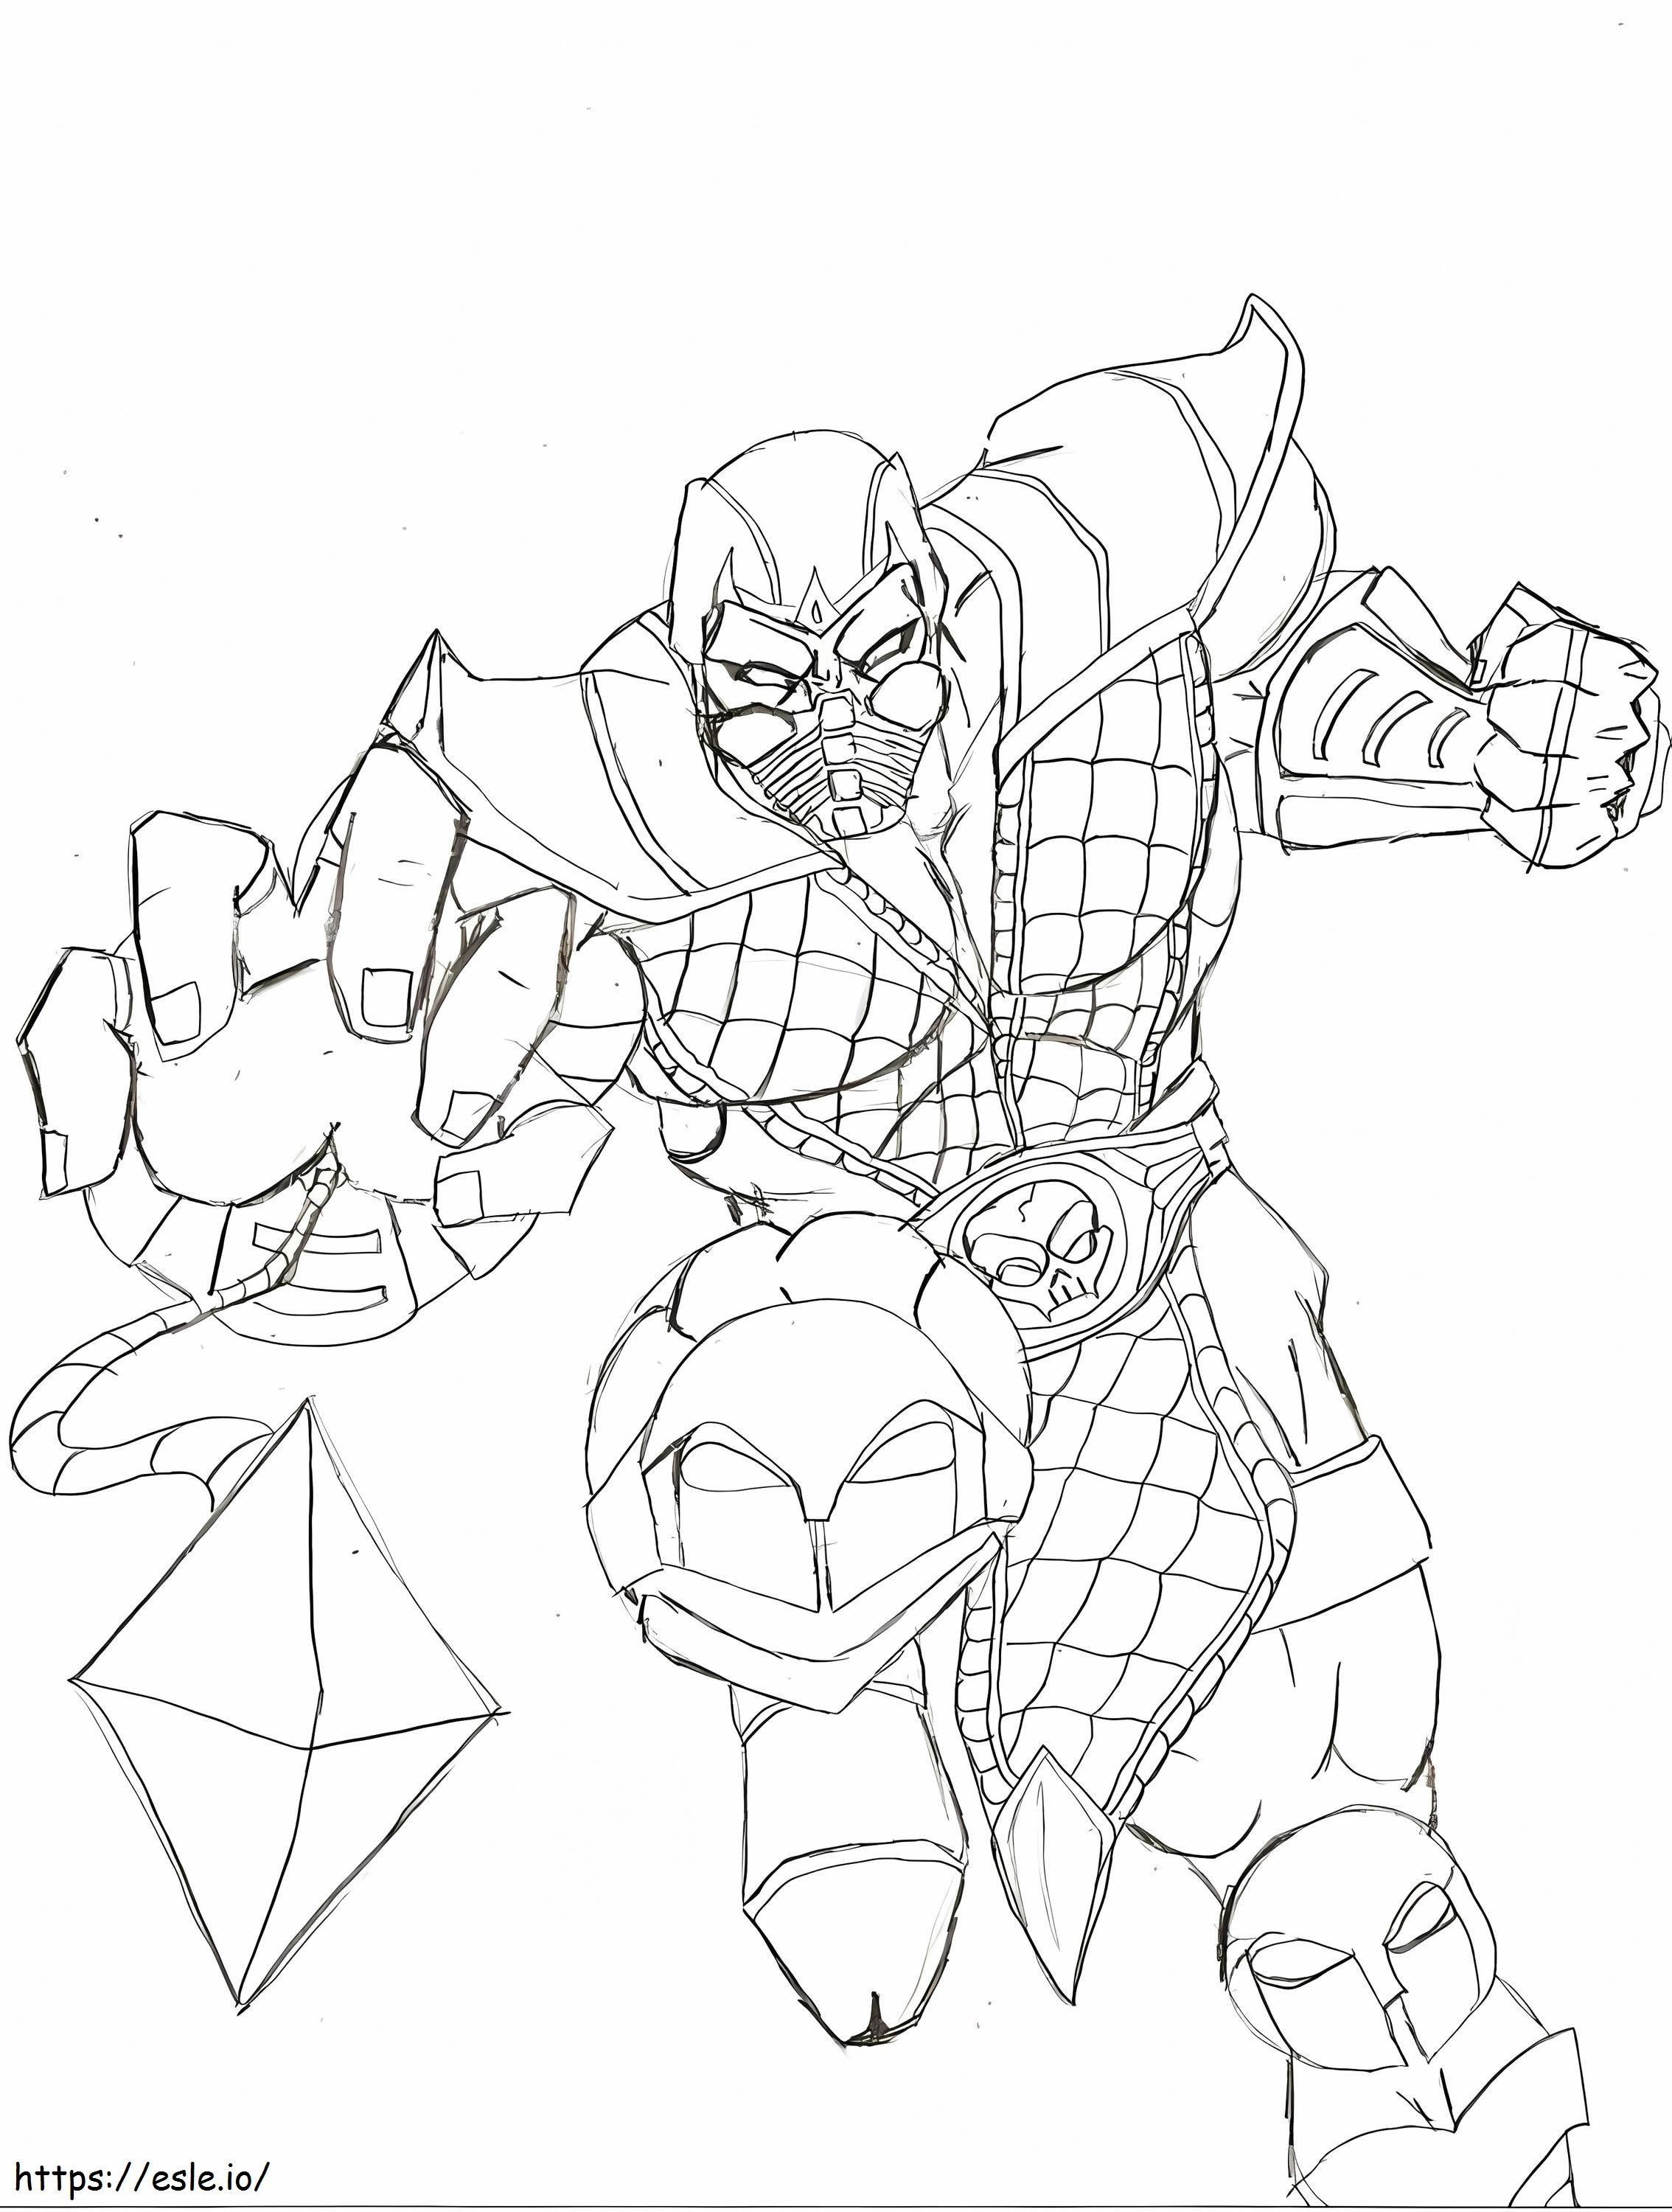 Scorpion Attack coloring page